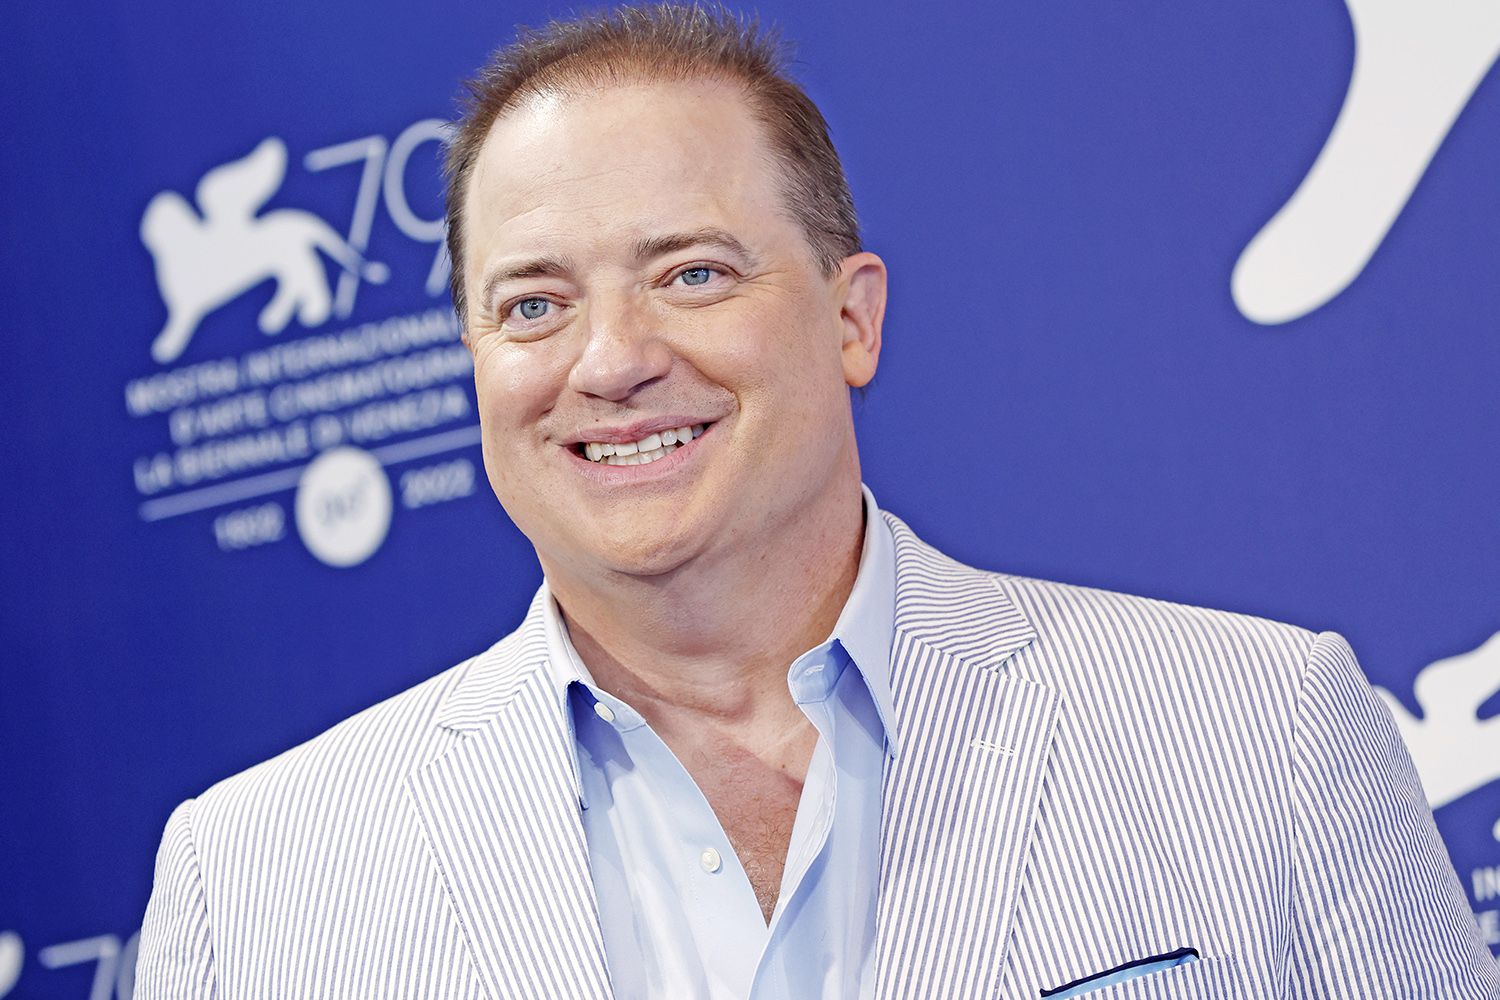 what is wrong with brendan fraser